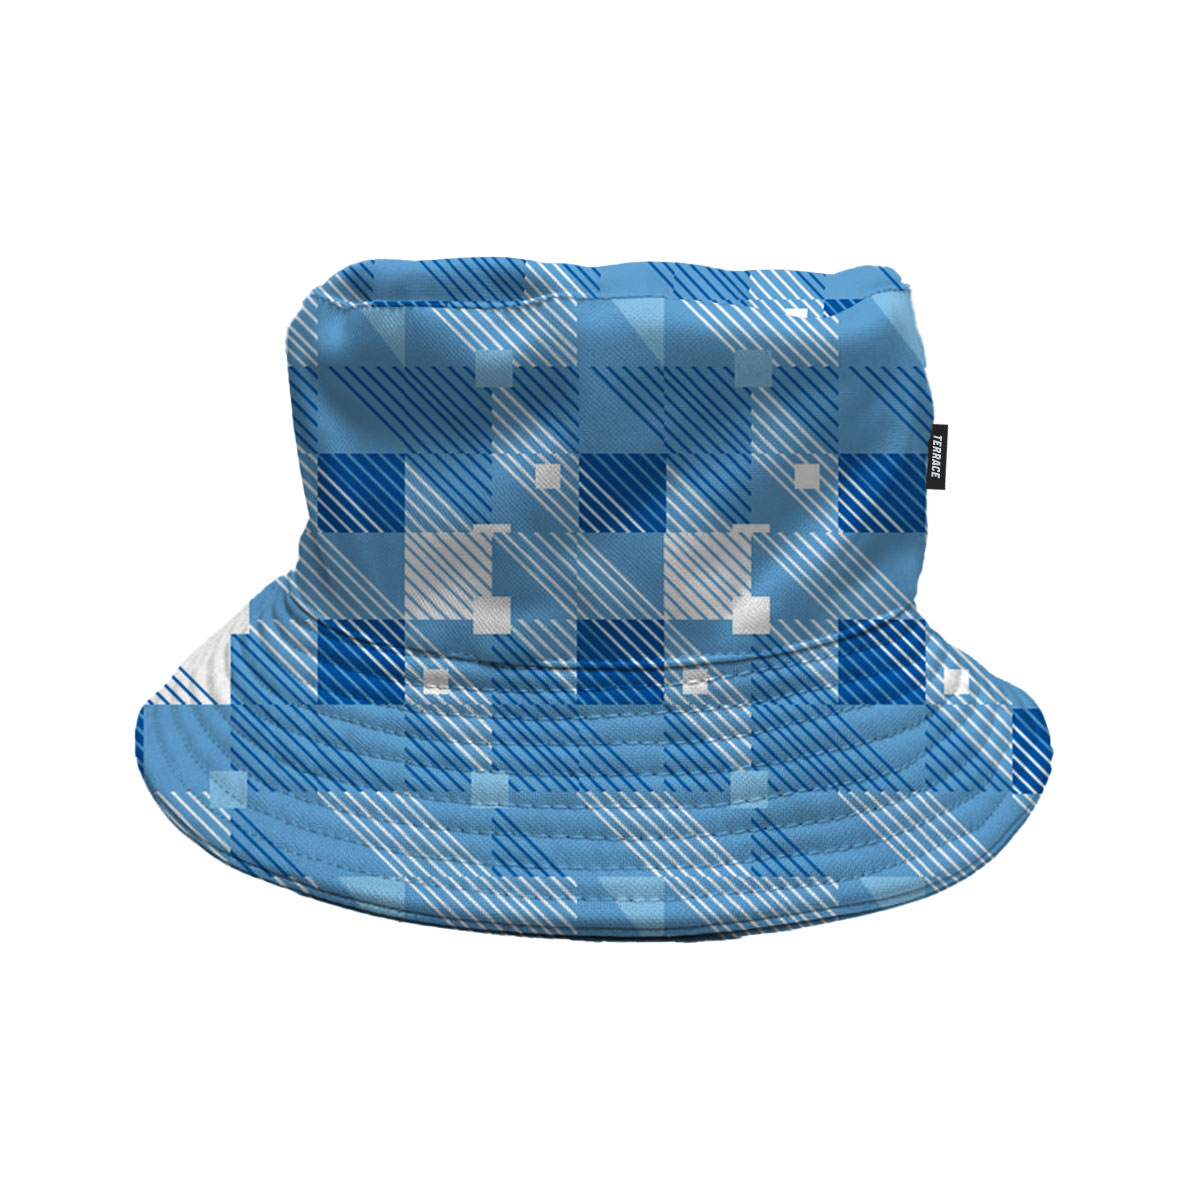 Get Euros ready with the new '90 inspired bucket hat, featuring that iconic England pattern! Order now | theterracestore.com/products/engla… Retweet and comment, we have one to give away #england